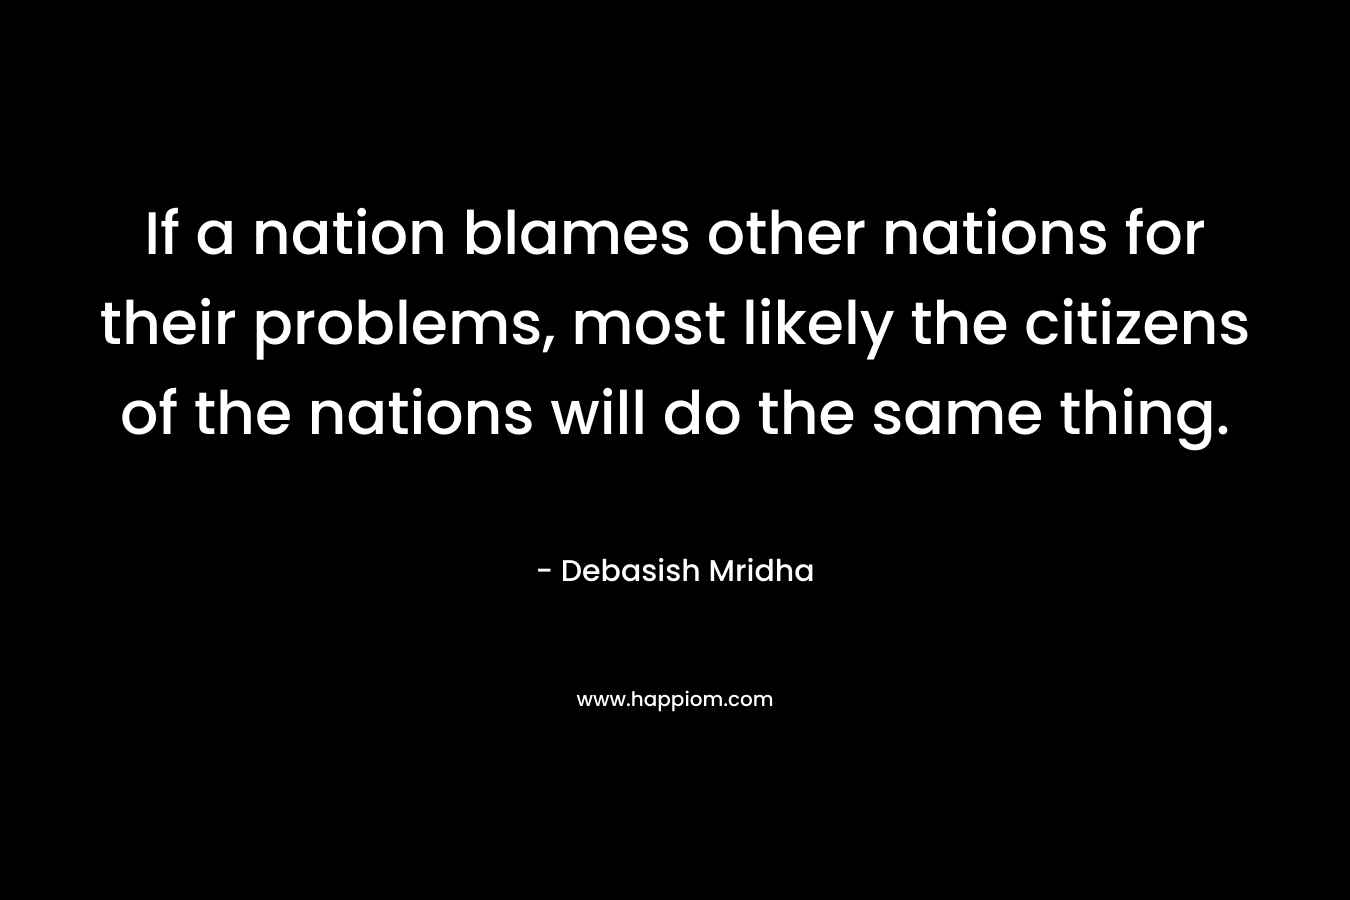 If a nation blames other nations for their problems, most likely the citizens of the nations will do the same thing. – Debasish Mridha